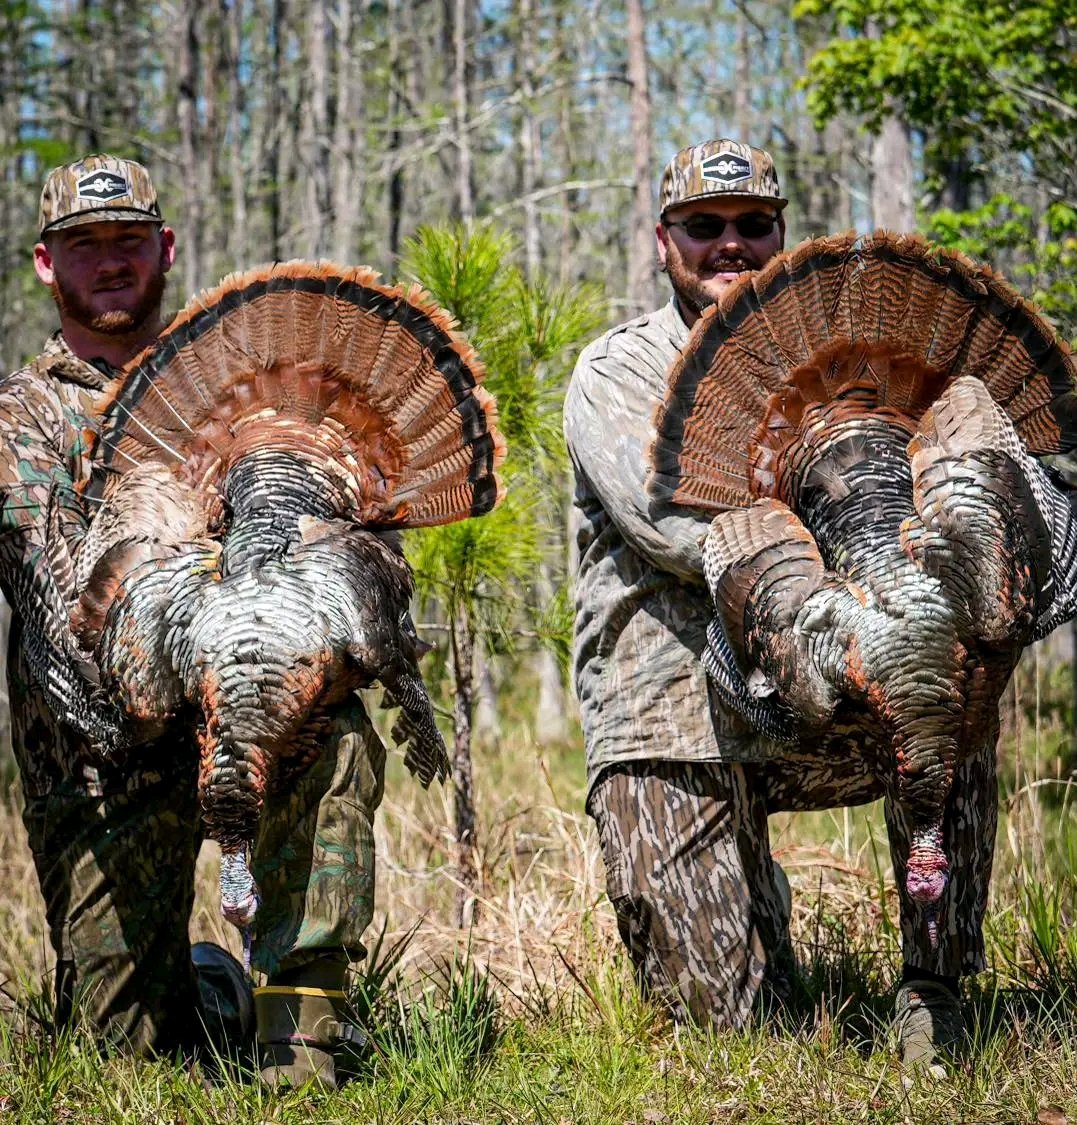 Congrats to my guys Matt and Sean!  These guys can get it done. 

#RidgeRockHuntCompany #GreatExperience #LetsHunt #Hunting